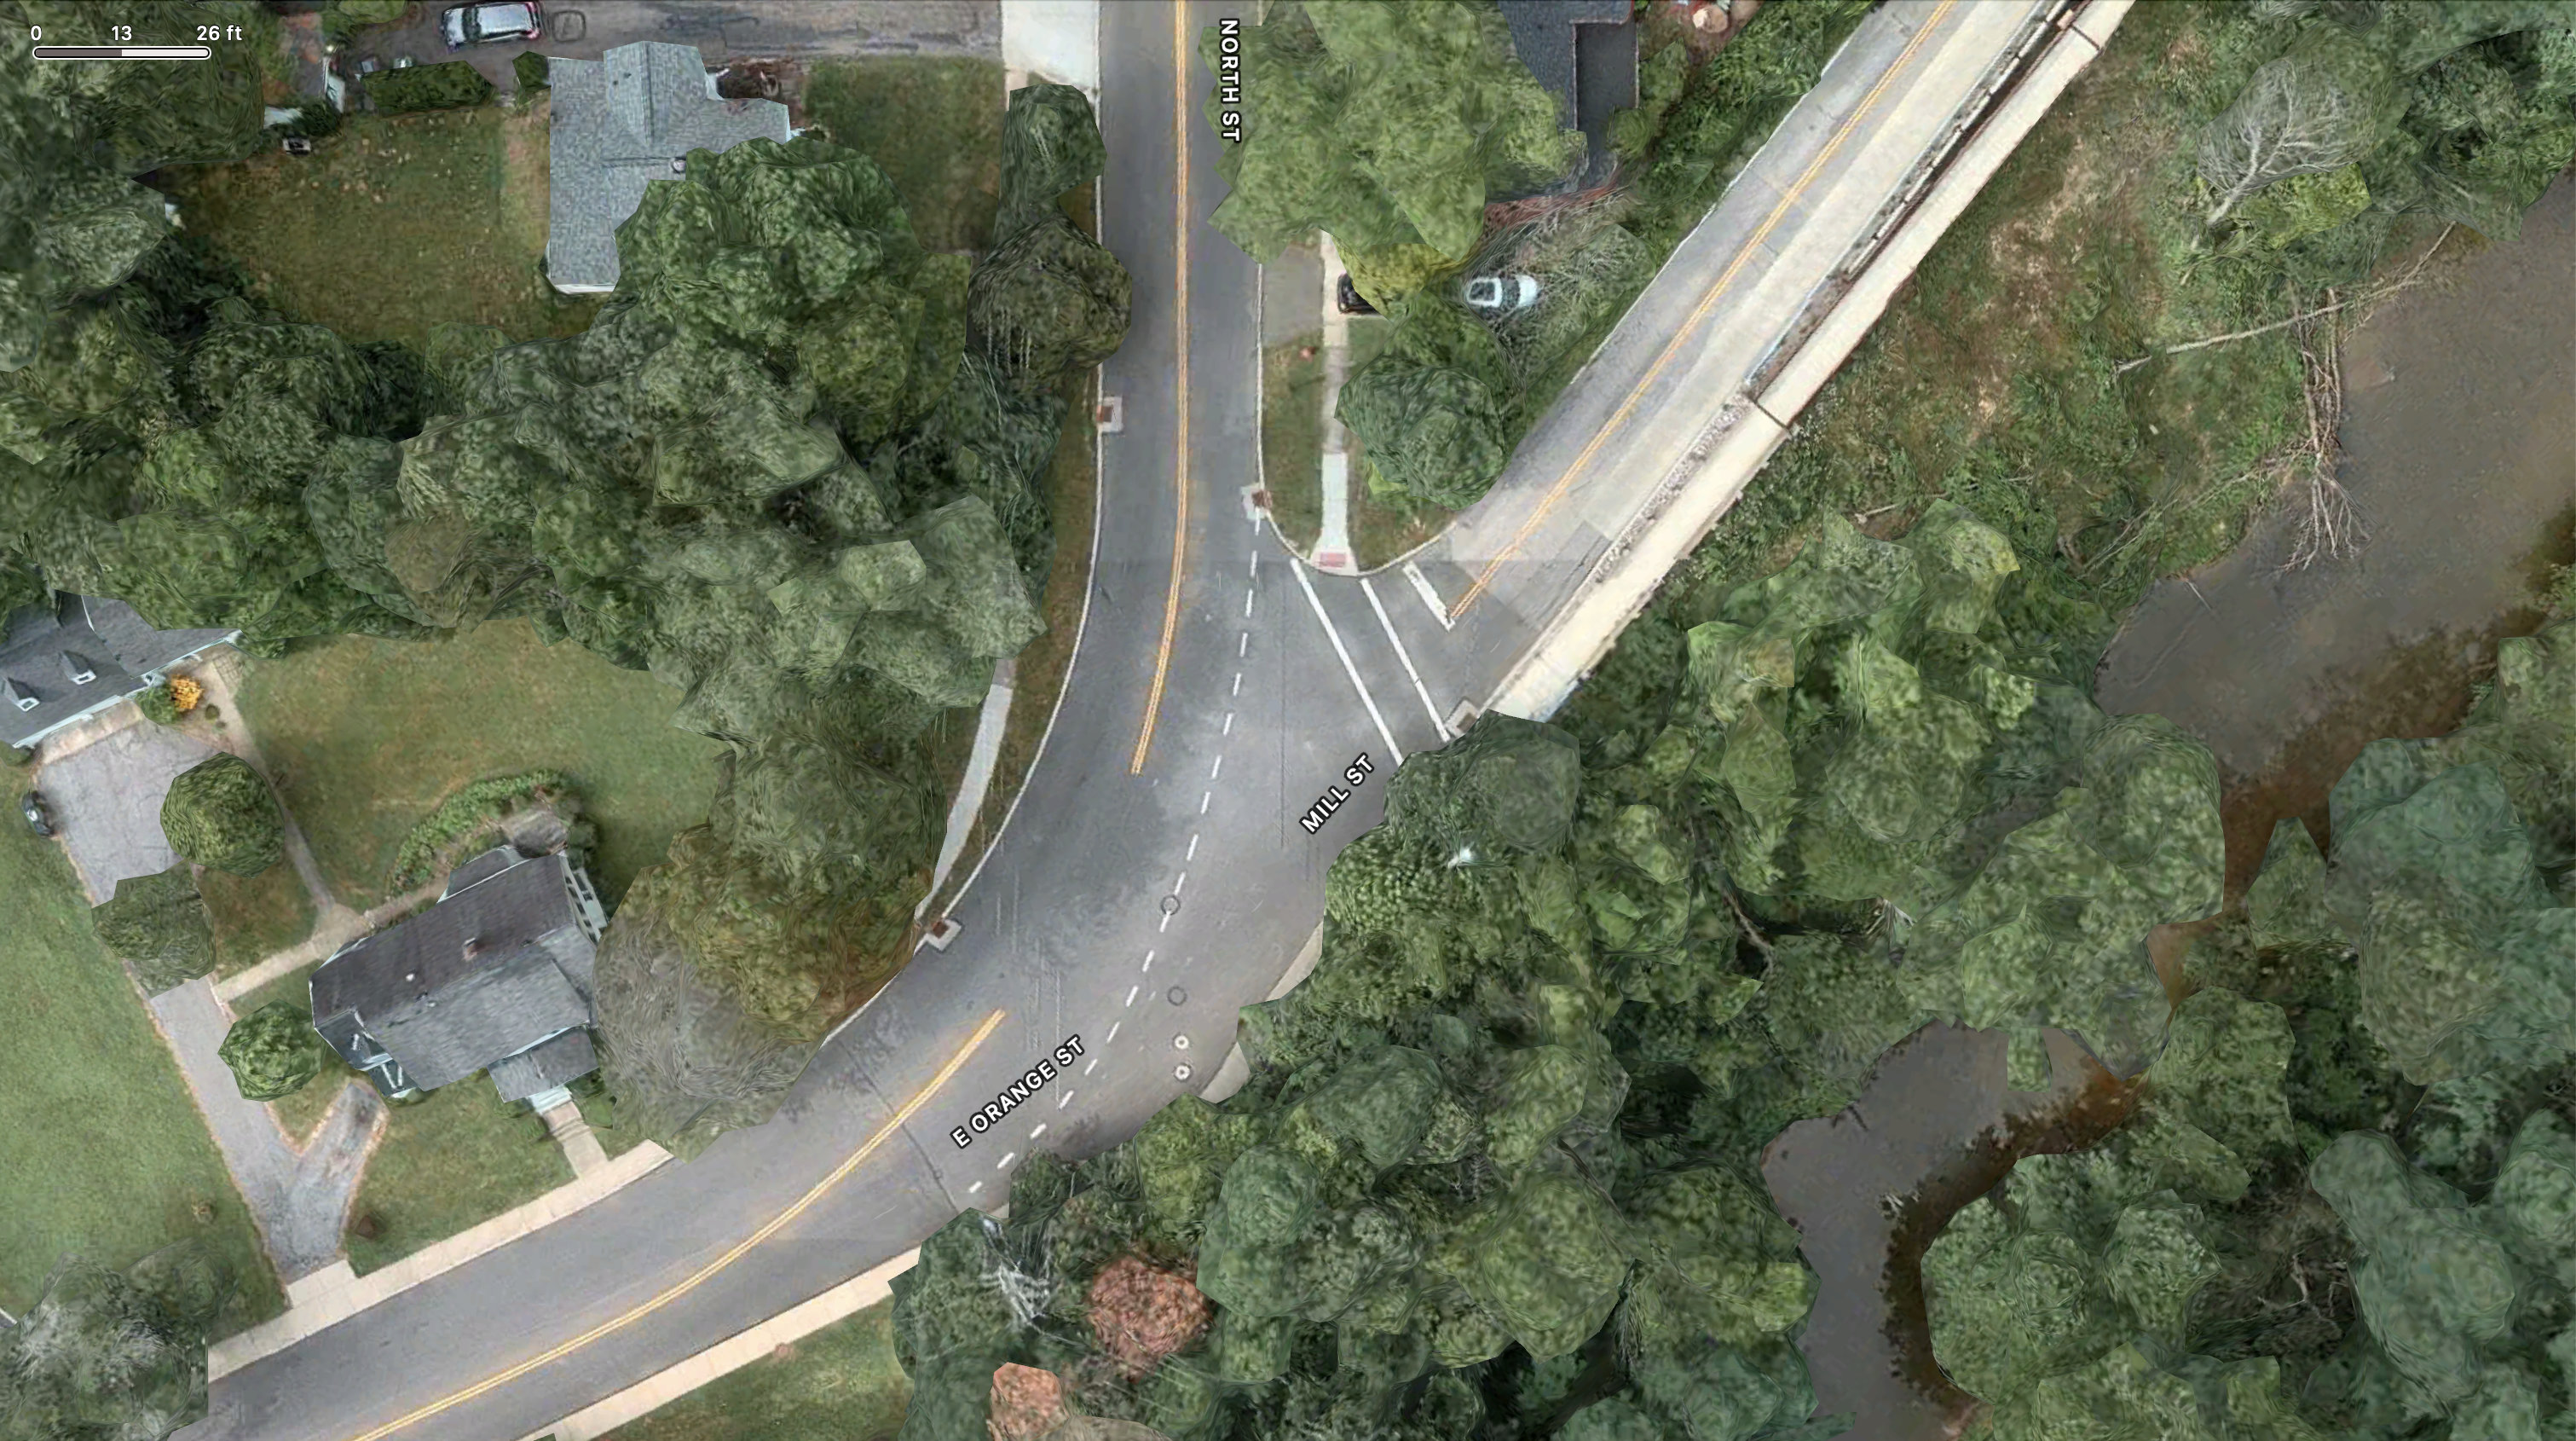 A top down view of the intersection